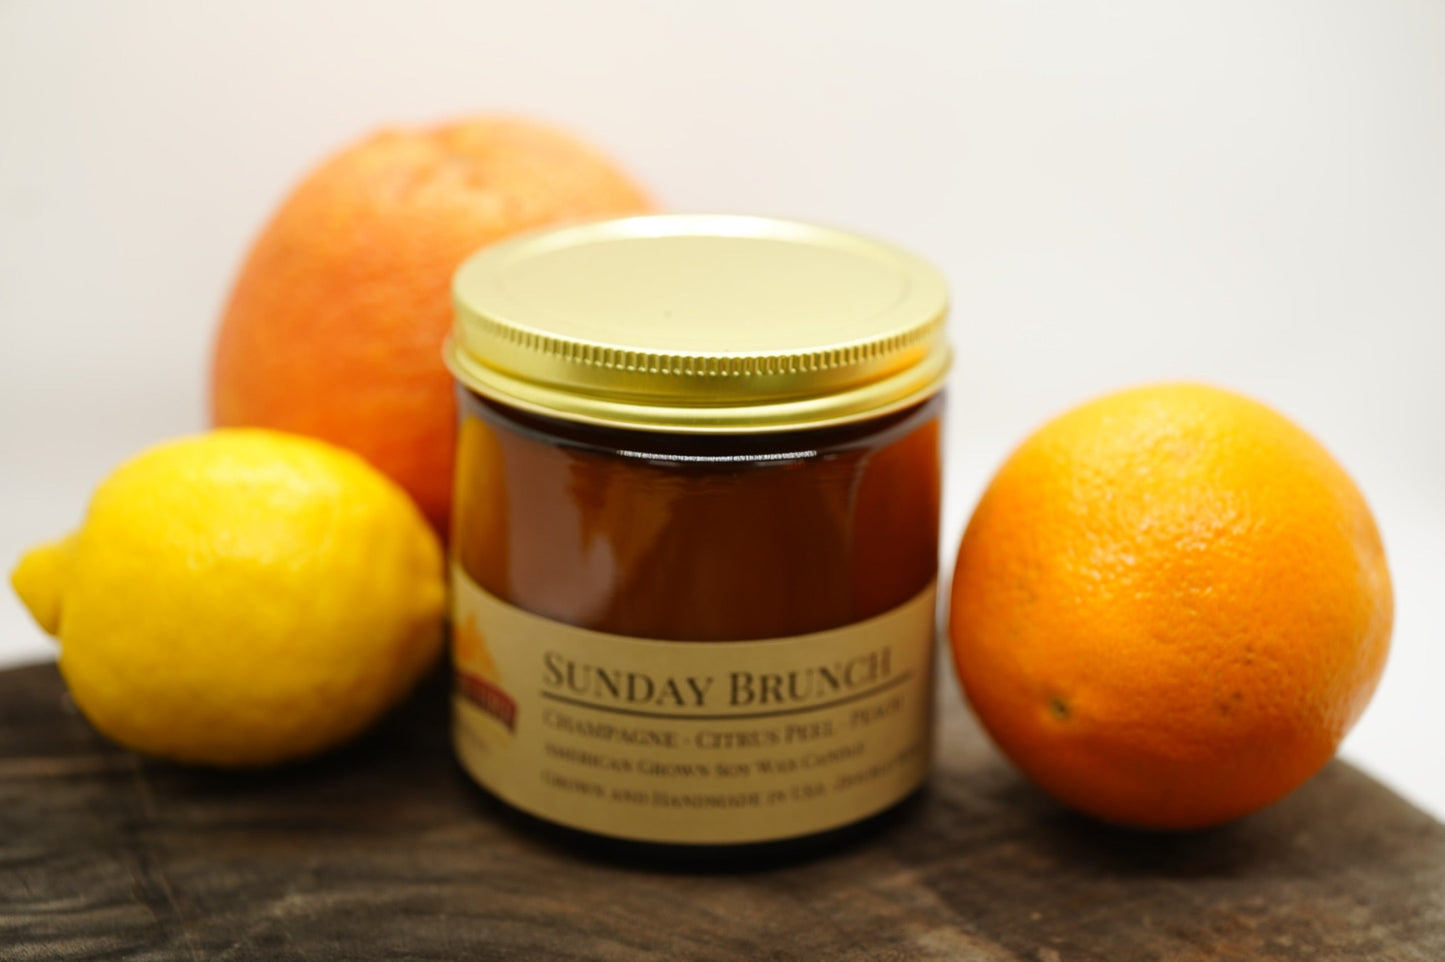 Sunday Brunch Soy Candle | 16 oz Double Wick Amber Apothecary Jar